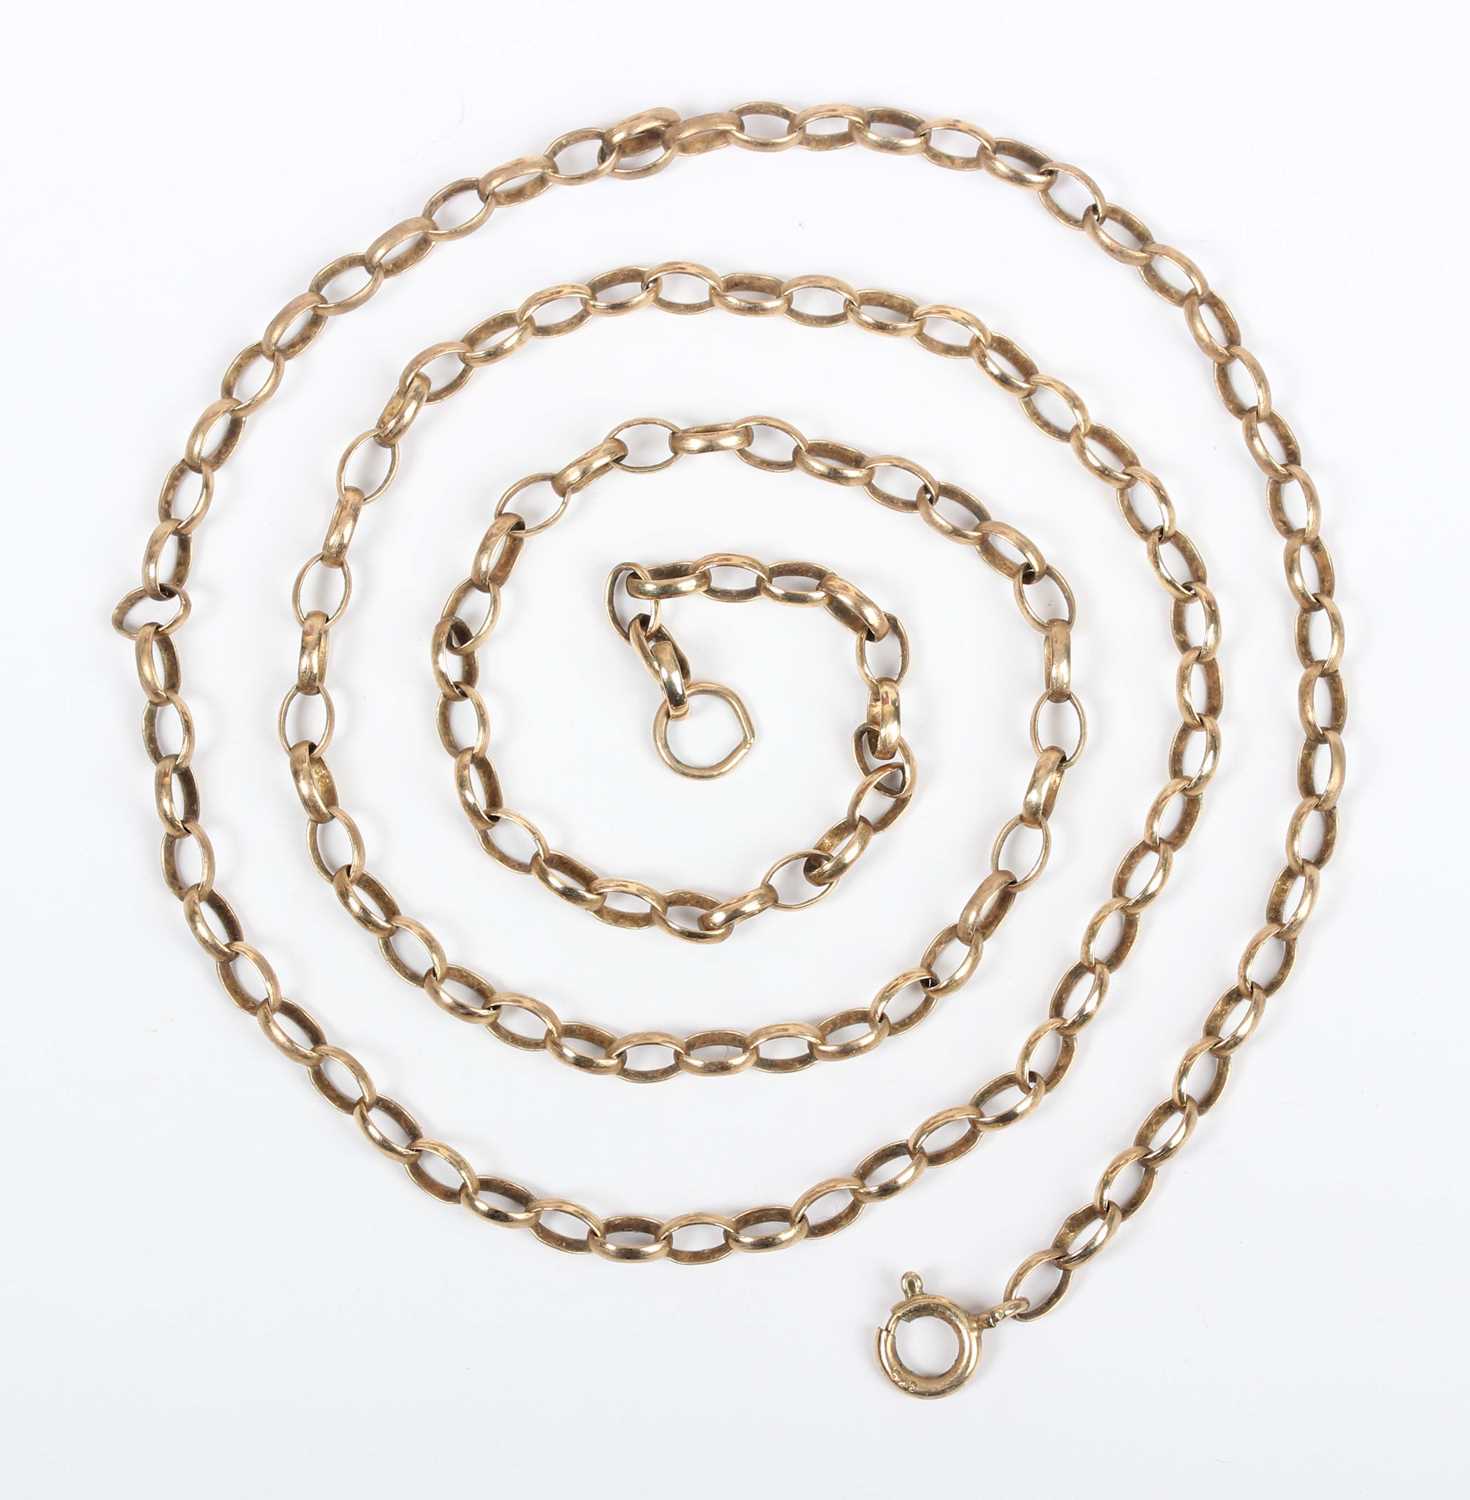 A 9ct gold oval link neckchain on a boltring clasp, London 1982, weight 9.8g, length 62.5cm.